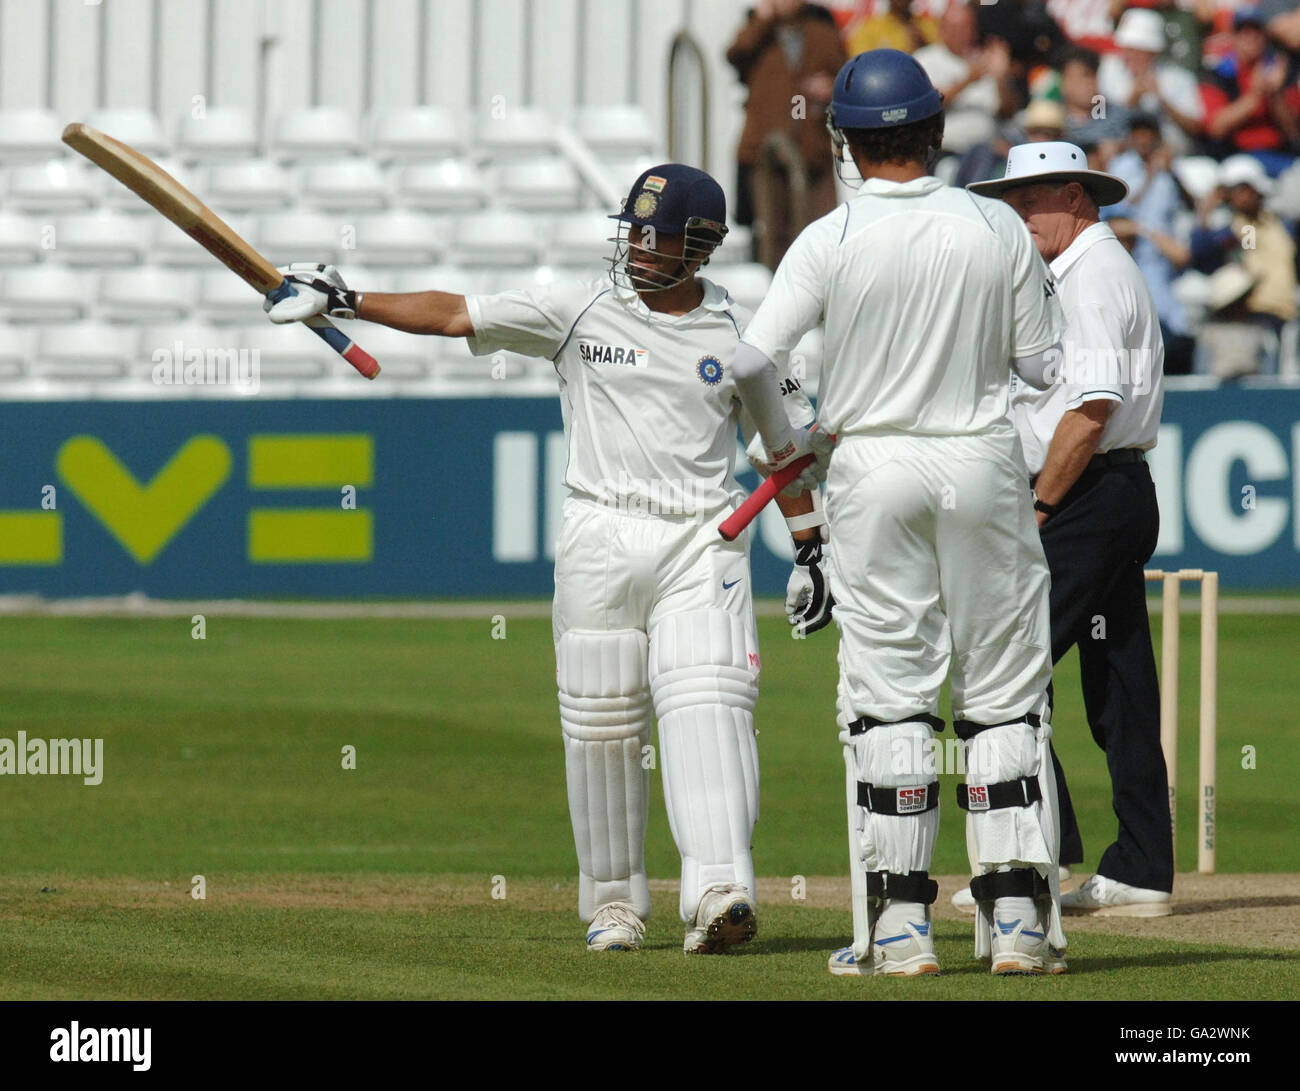 Cricket - England Lions v India - Tour Match - County Ground - Chelmsford. India's Sachin Tendulkar celebrates his century during the Tour Match at the County Ground, Chelmsford, Essex. Stock Photo